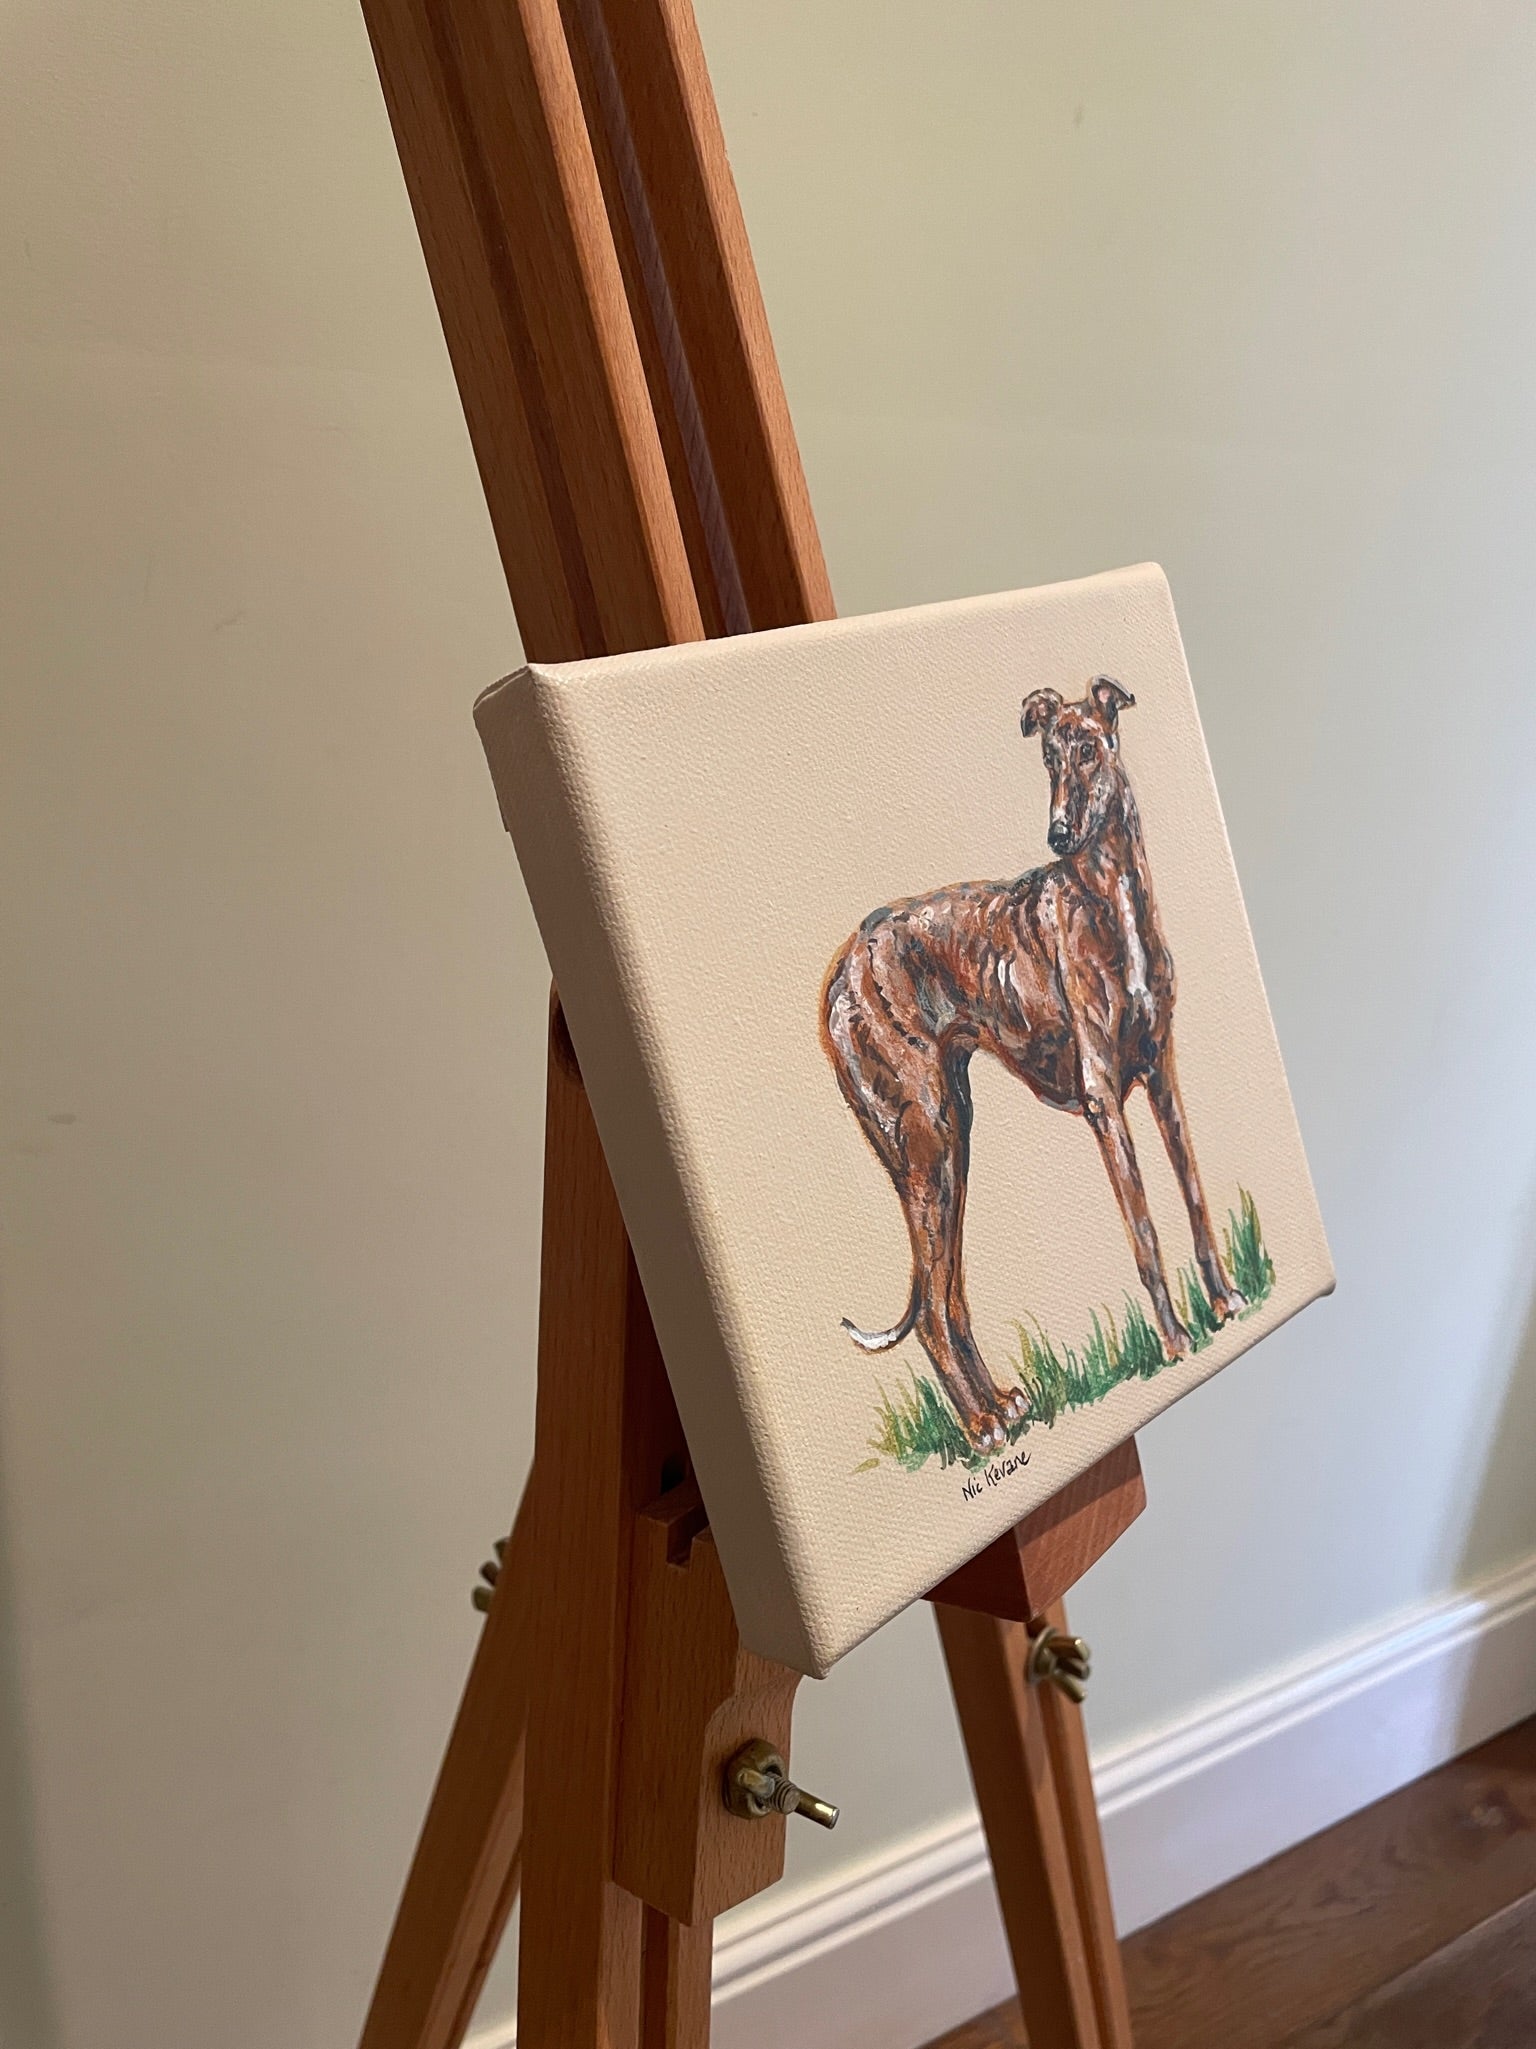 Brindle Greyhound - 15cm x 15cm mini paintings depicting various countryside subjects.